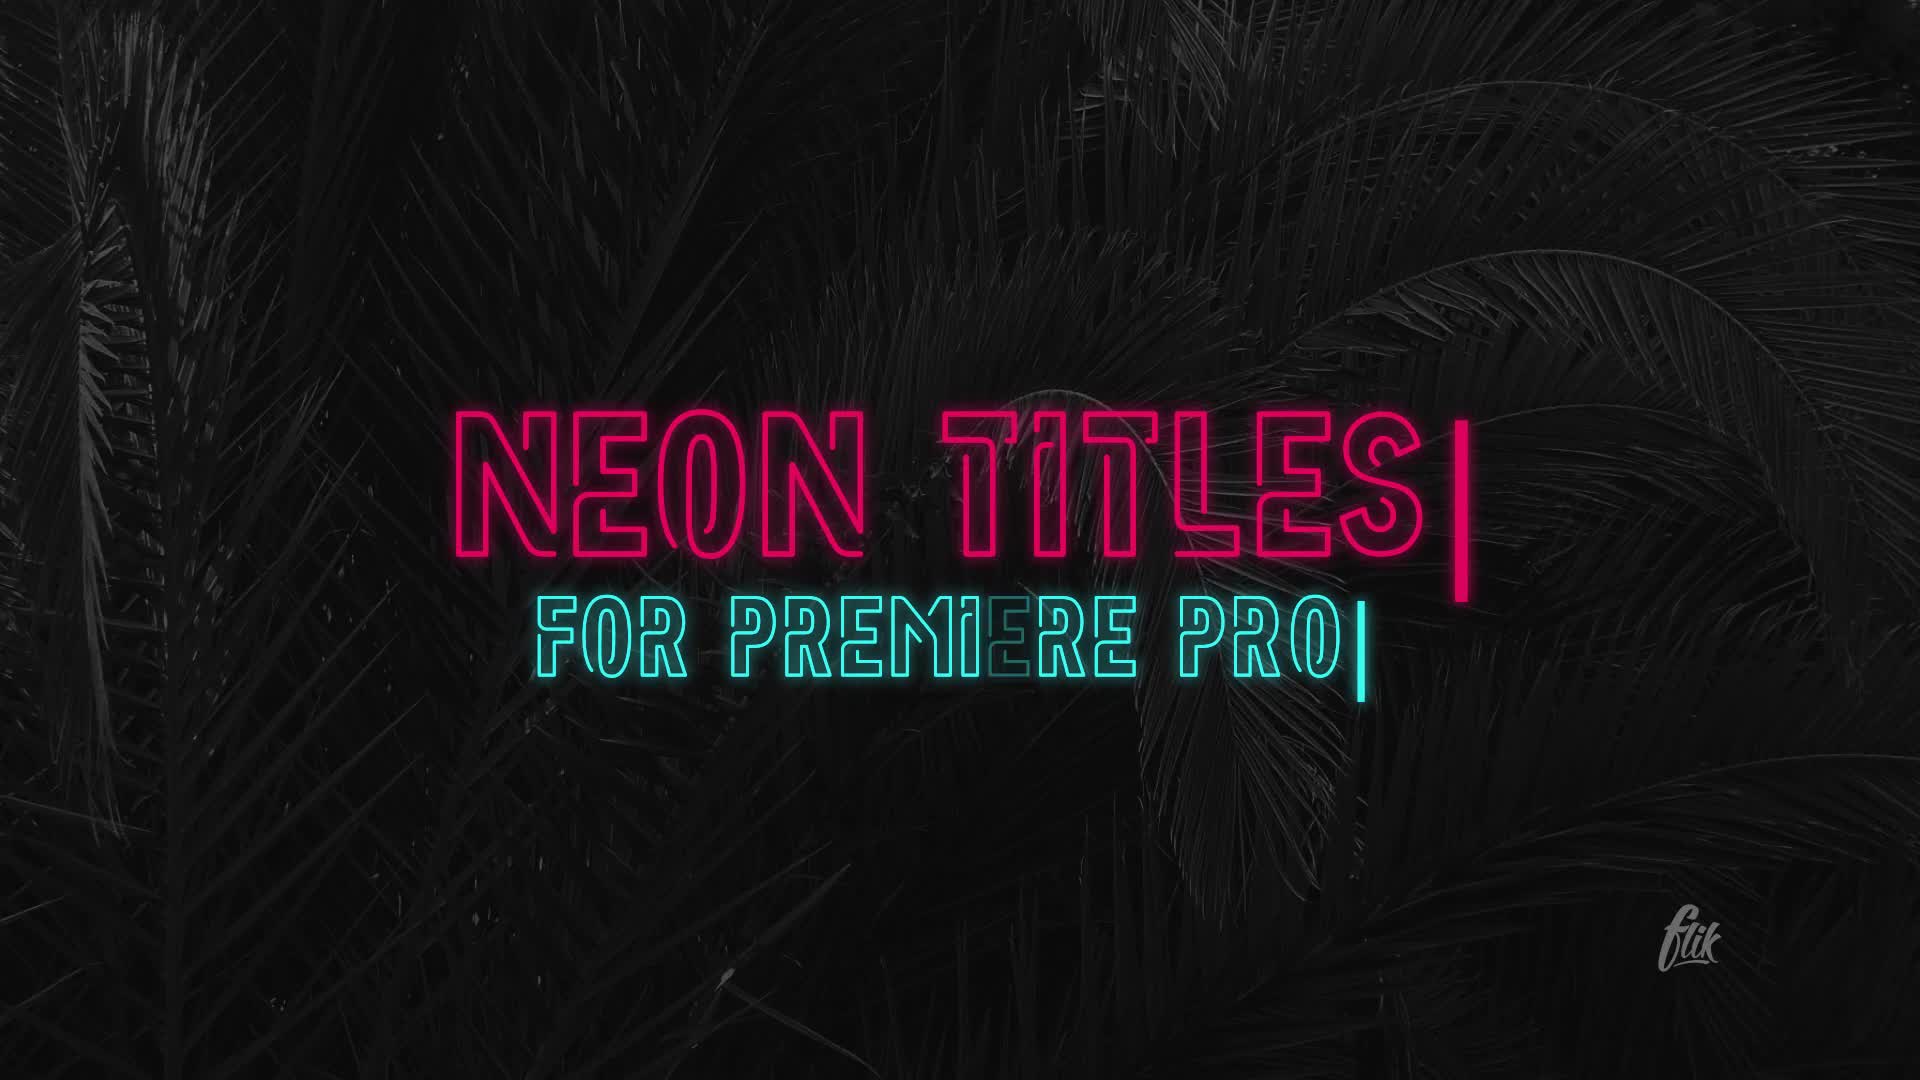 Neon Titles - Download Videohive 22504018